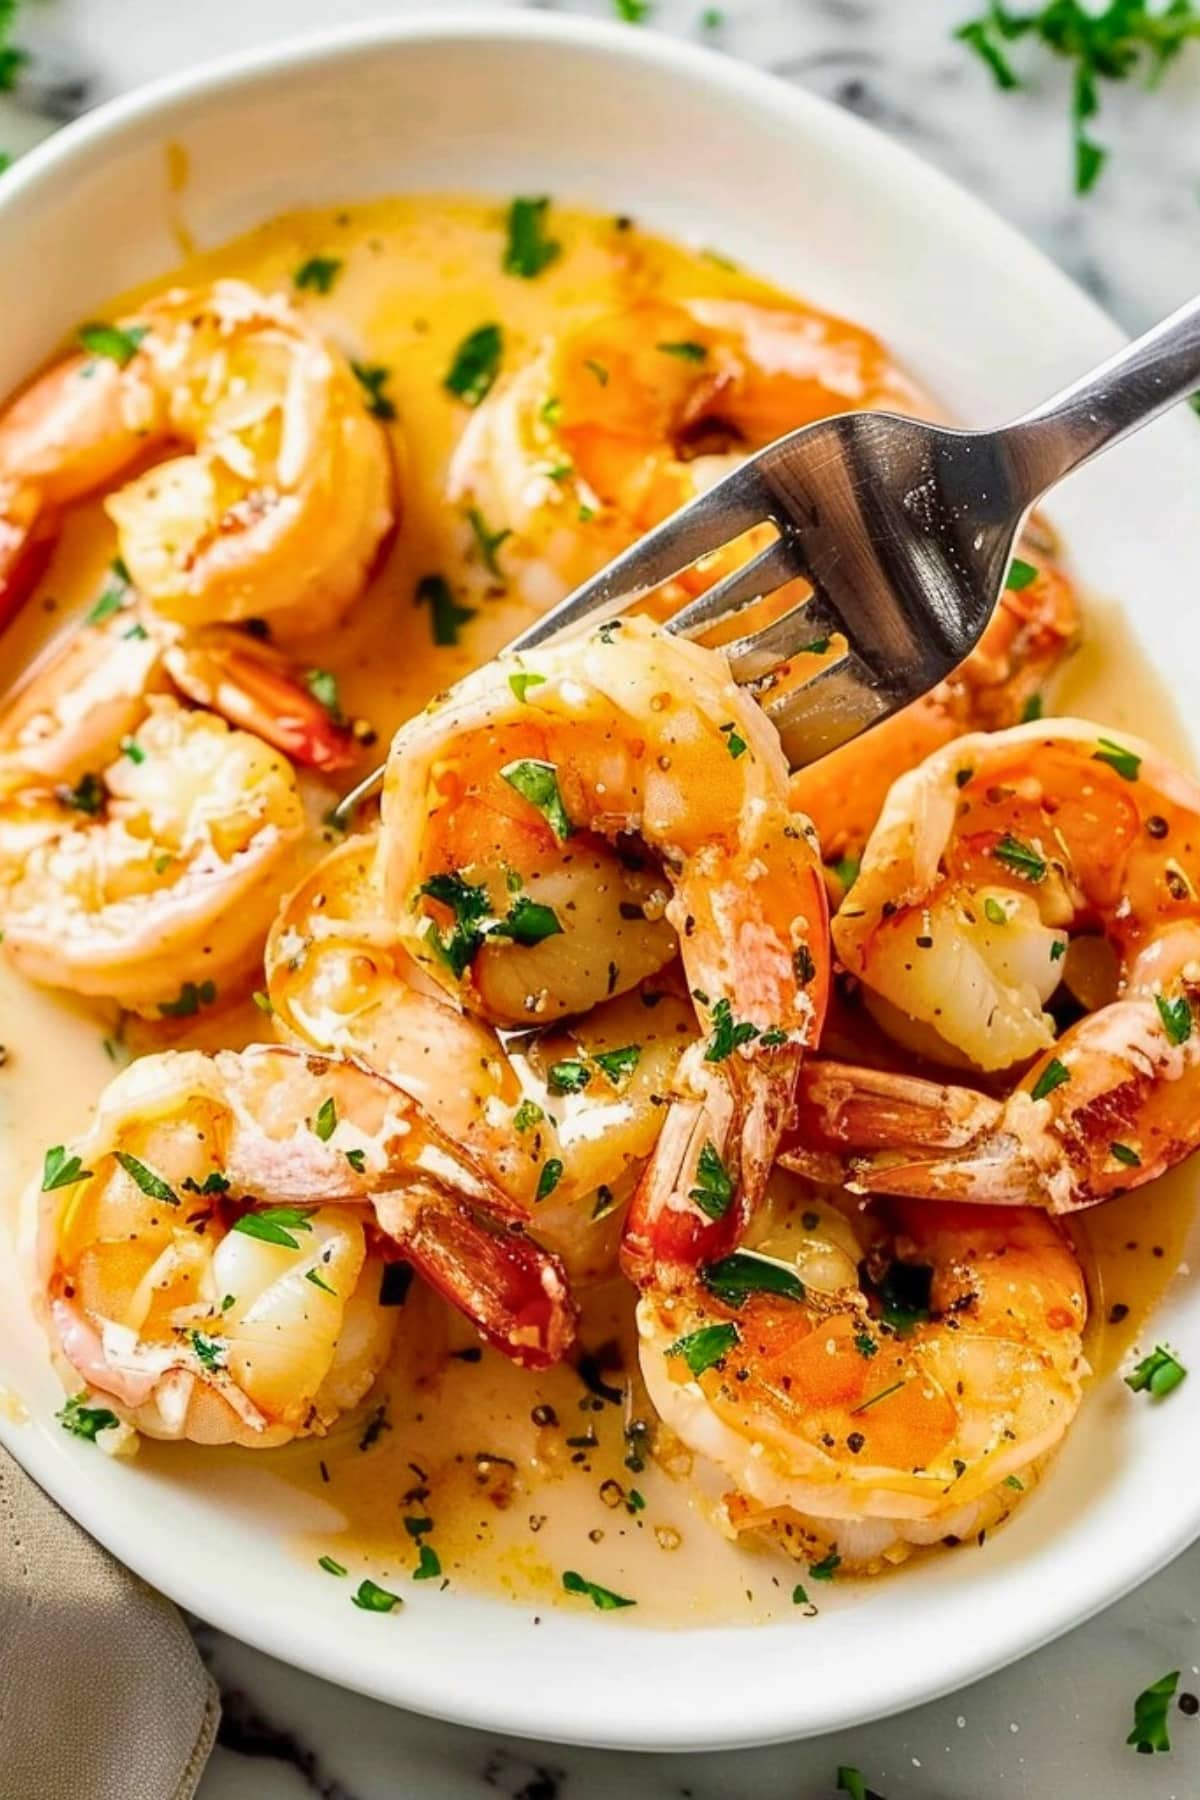 Shrimp with garlic butter sauce in a white plate.